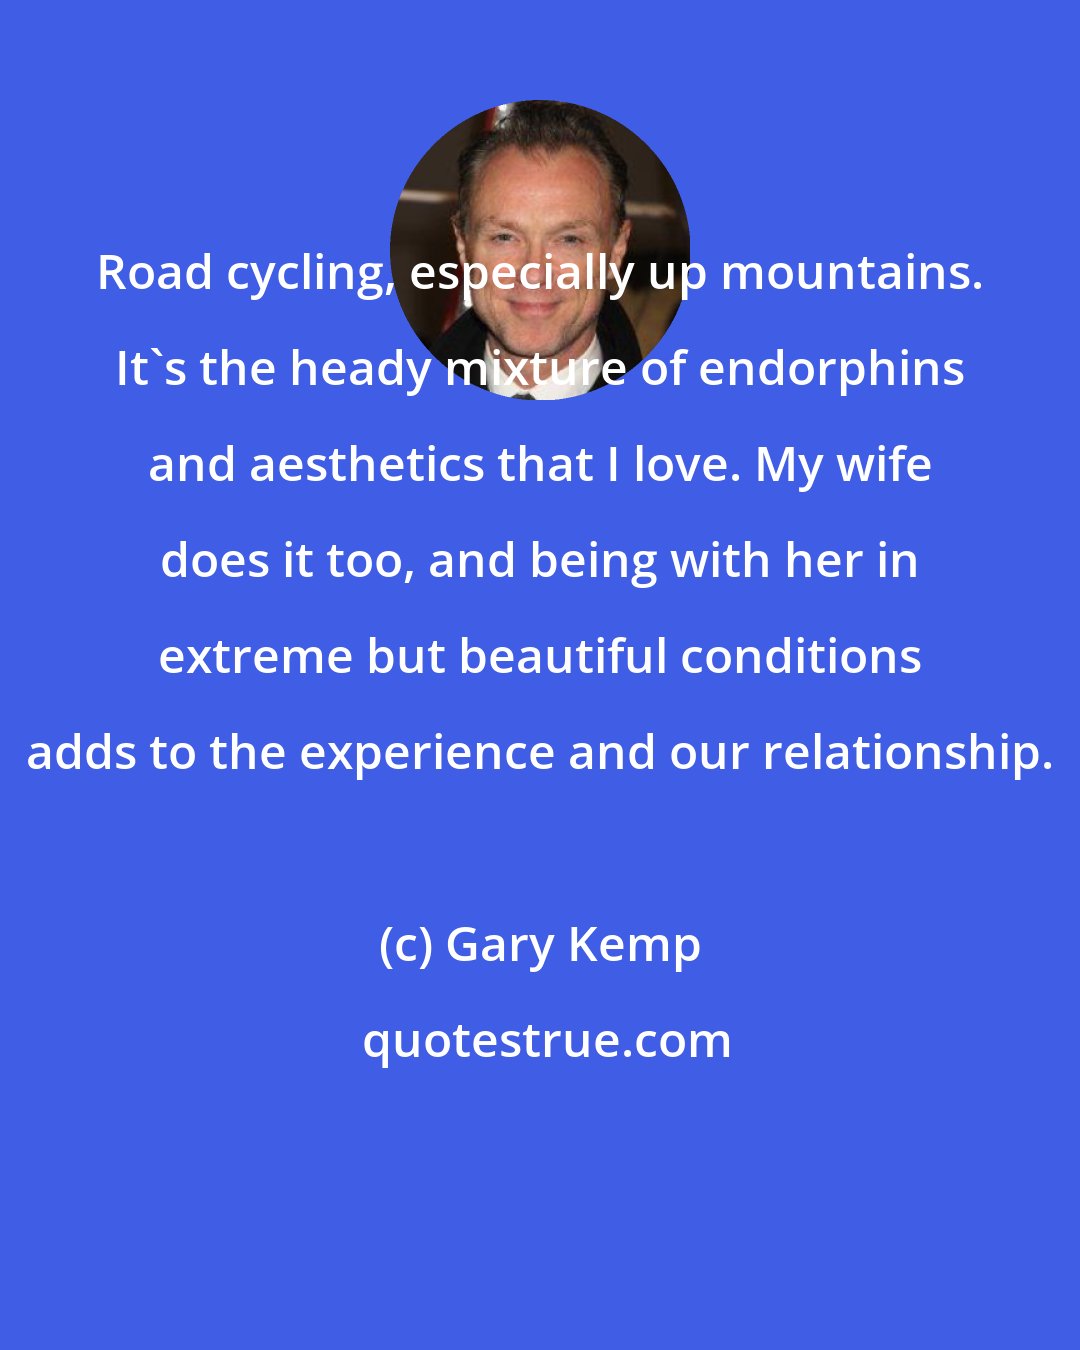 Gary Kemp: Road cycling, especially up mountains. It's the heady mixture of endorphins and aesthetics that I love. My wife does it too, and being with her in extreme but beautiful conditions adds to the experience and our relationship.